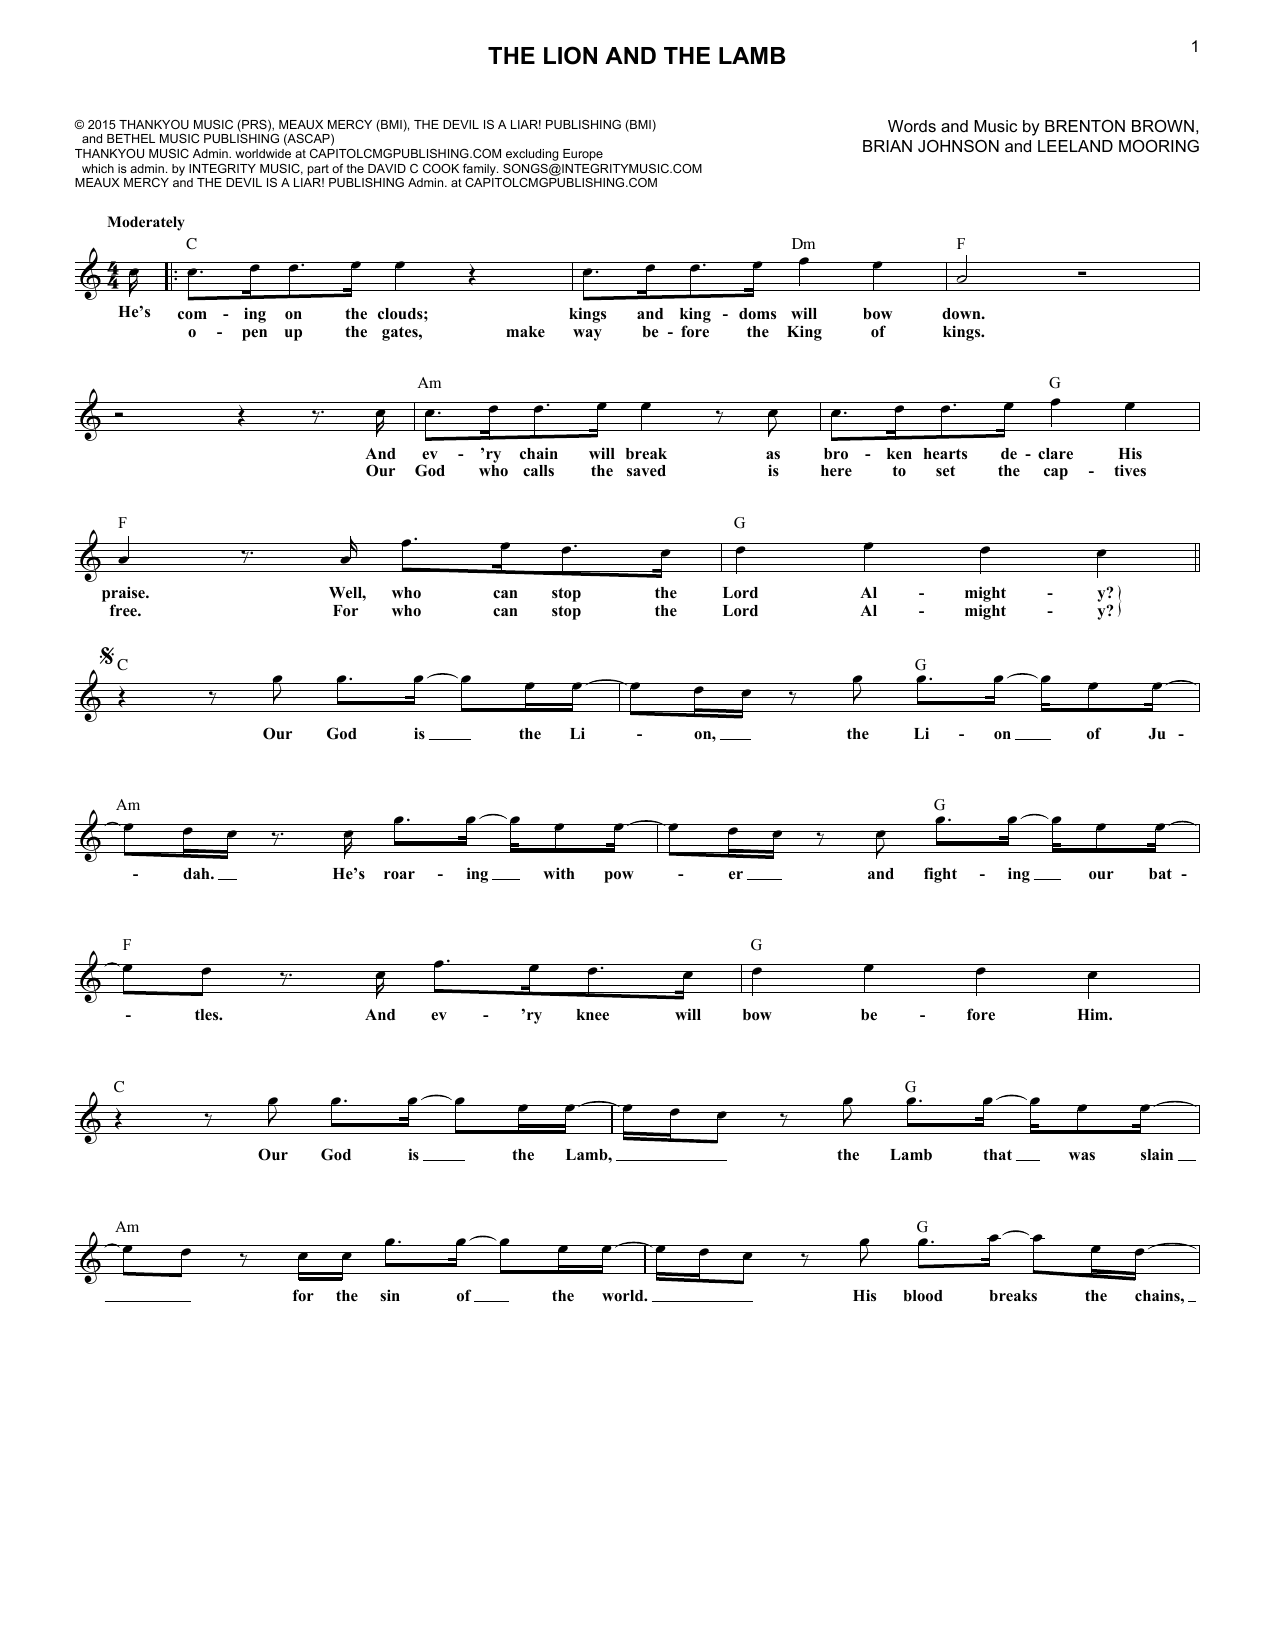 Download Big Daddy Weave The Lion And The Lamb Sheet Music